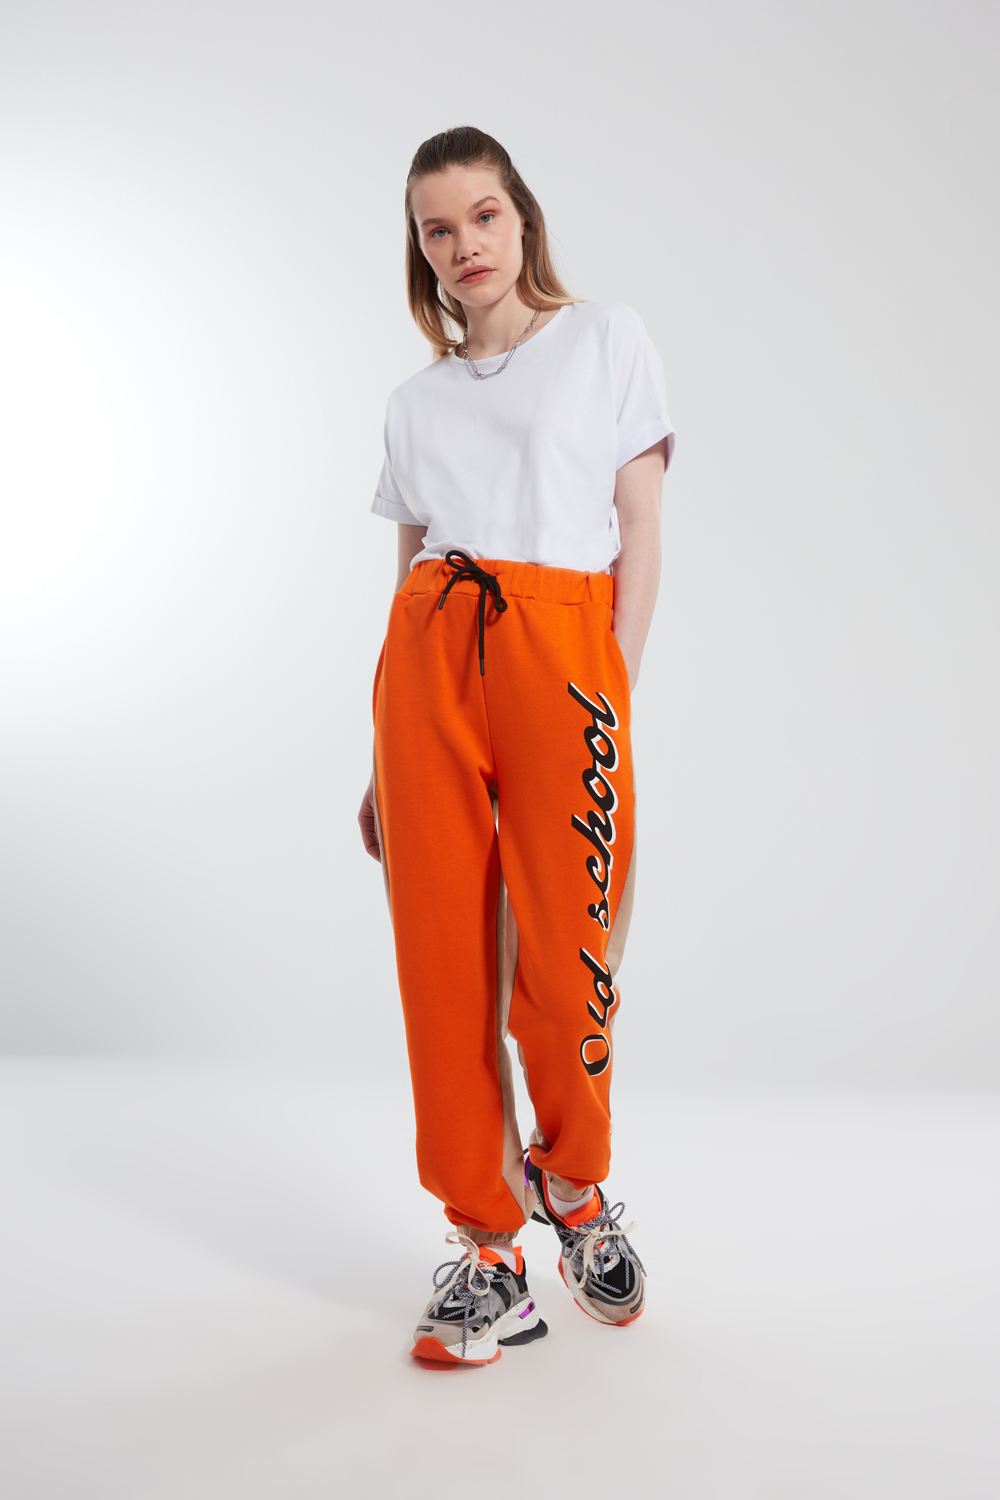 Old School Printed Detail French Ferry Orange Trousers